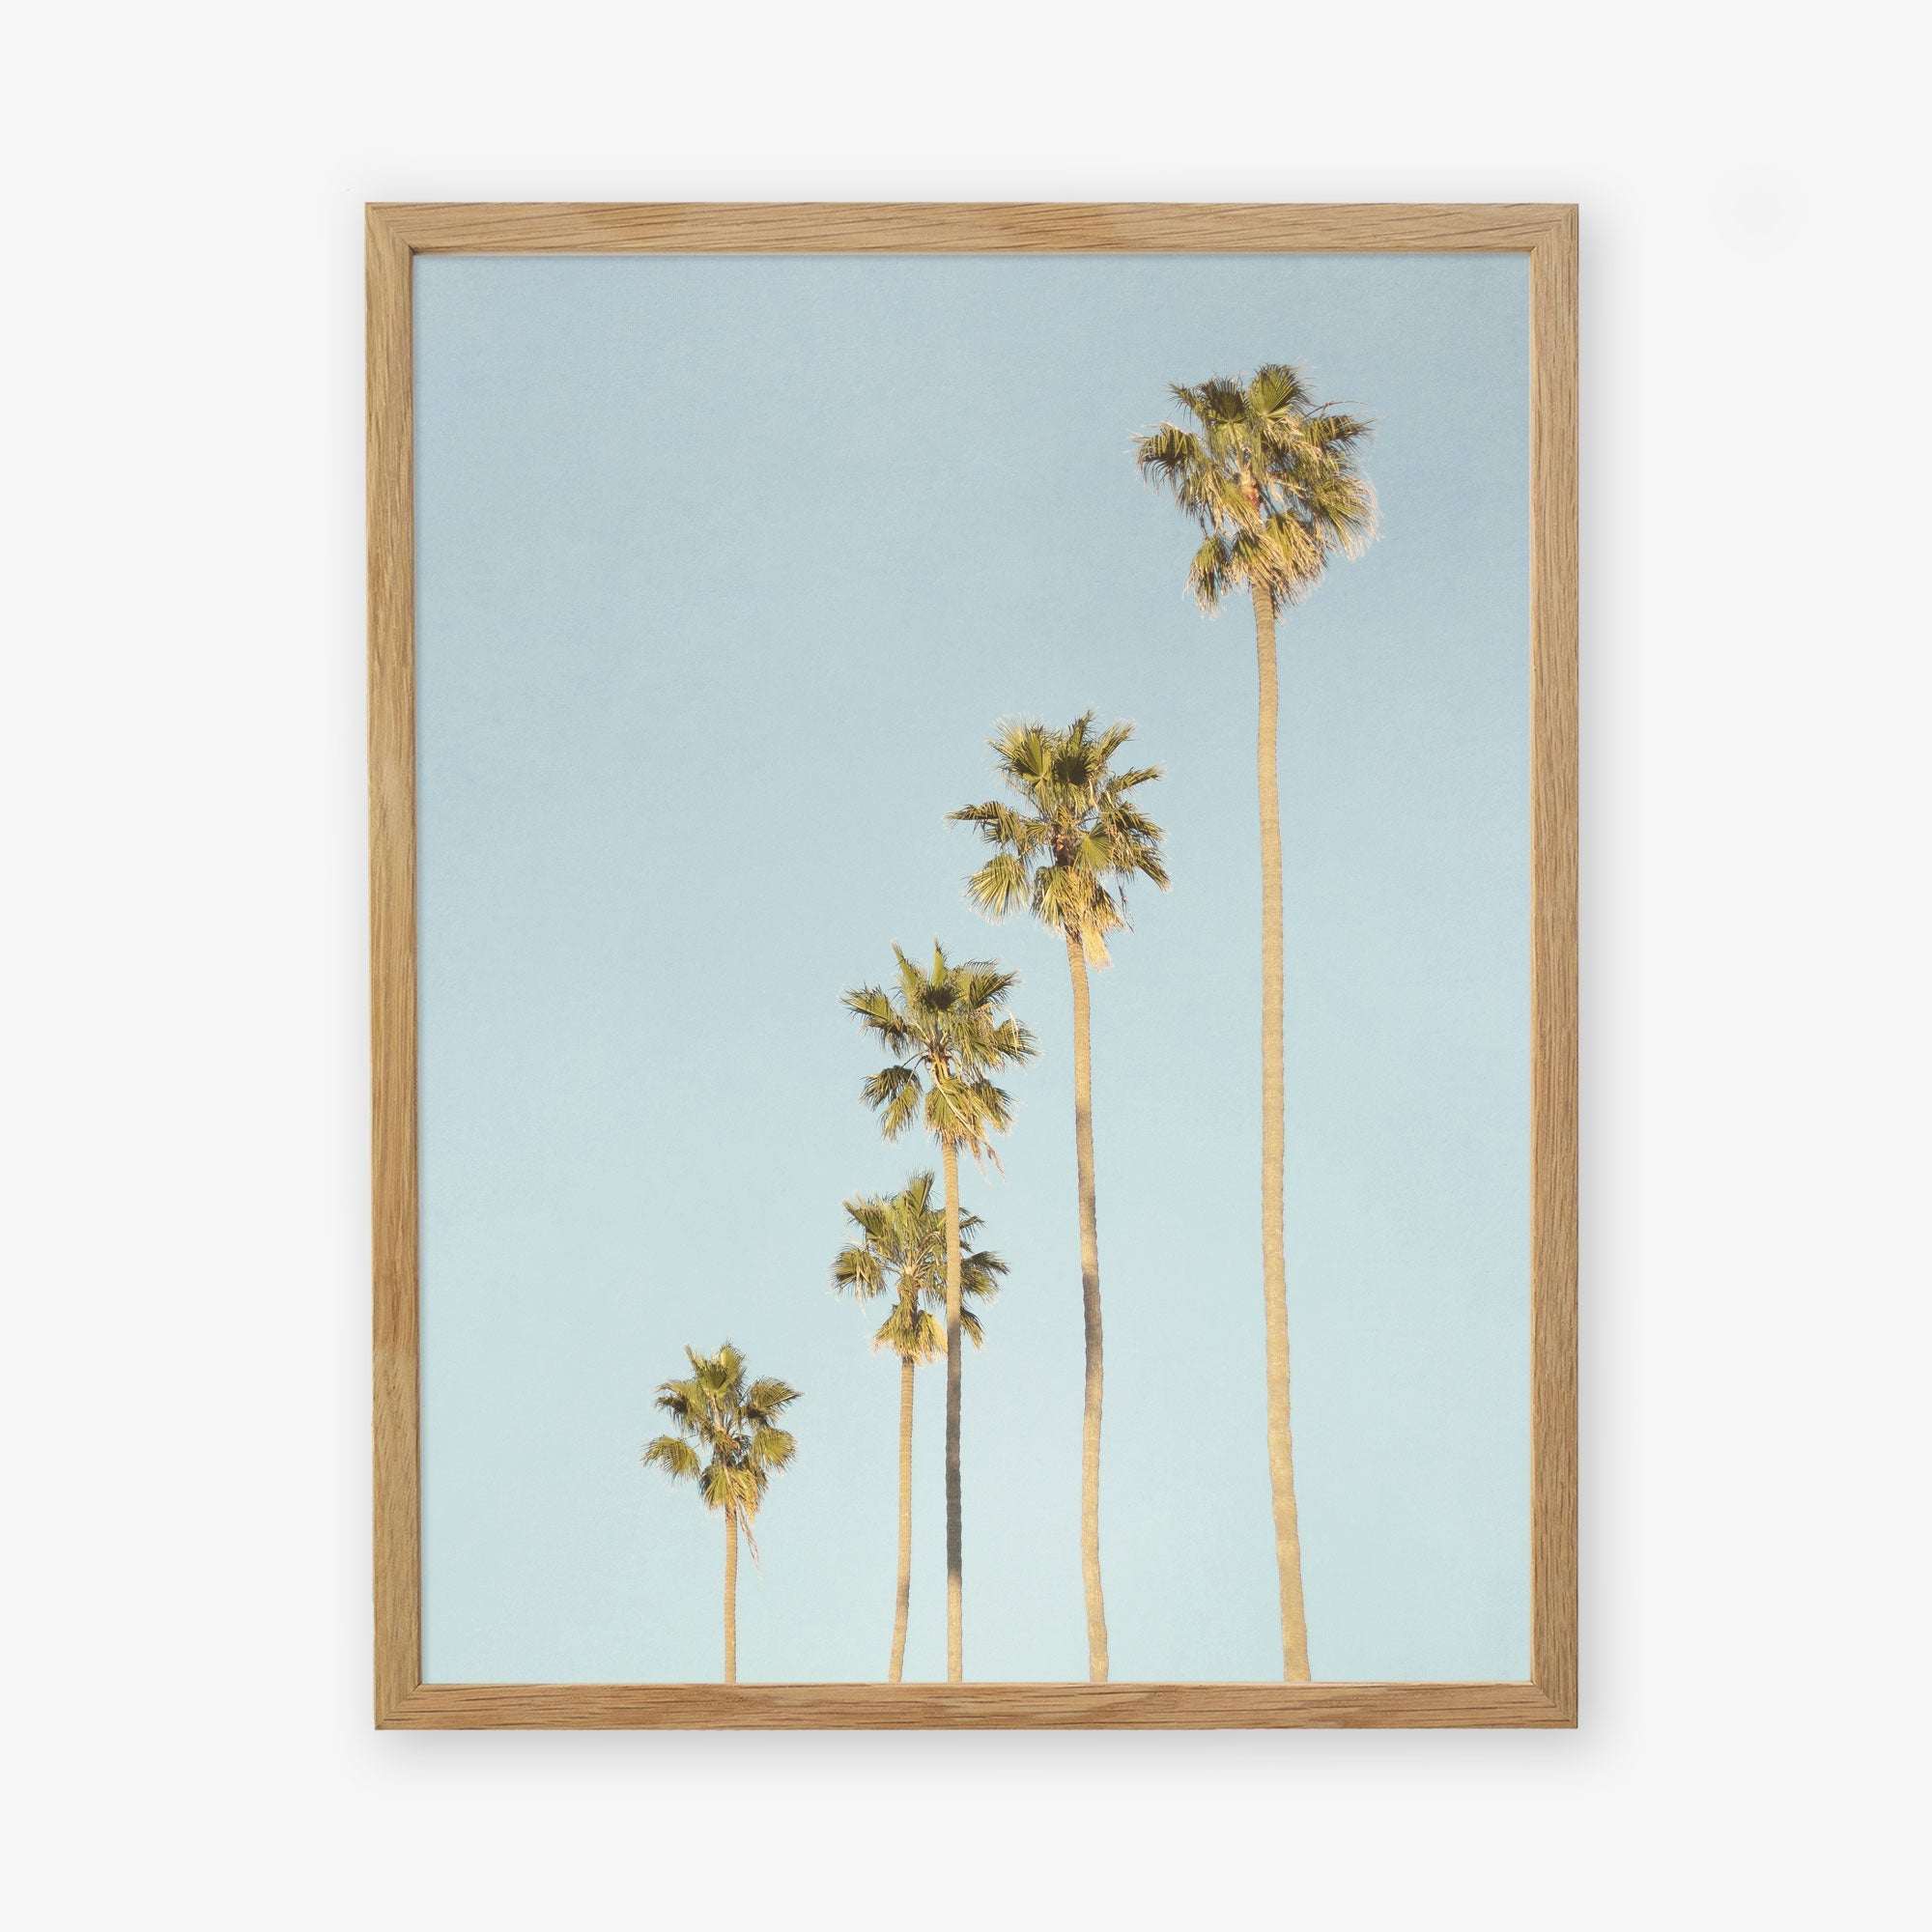 A framed picture of tall palm trees against a pale blue background. The wooden frame is simple and light-colored, enhancing the serene Offley Green &#39;Palm Tree Steps&#39; photographic print scene.